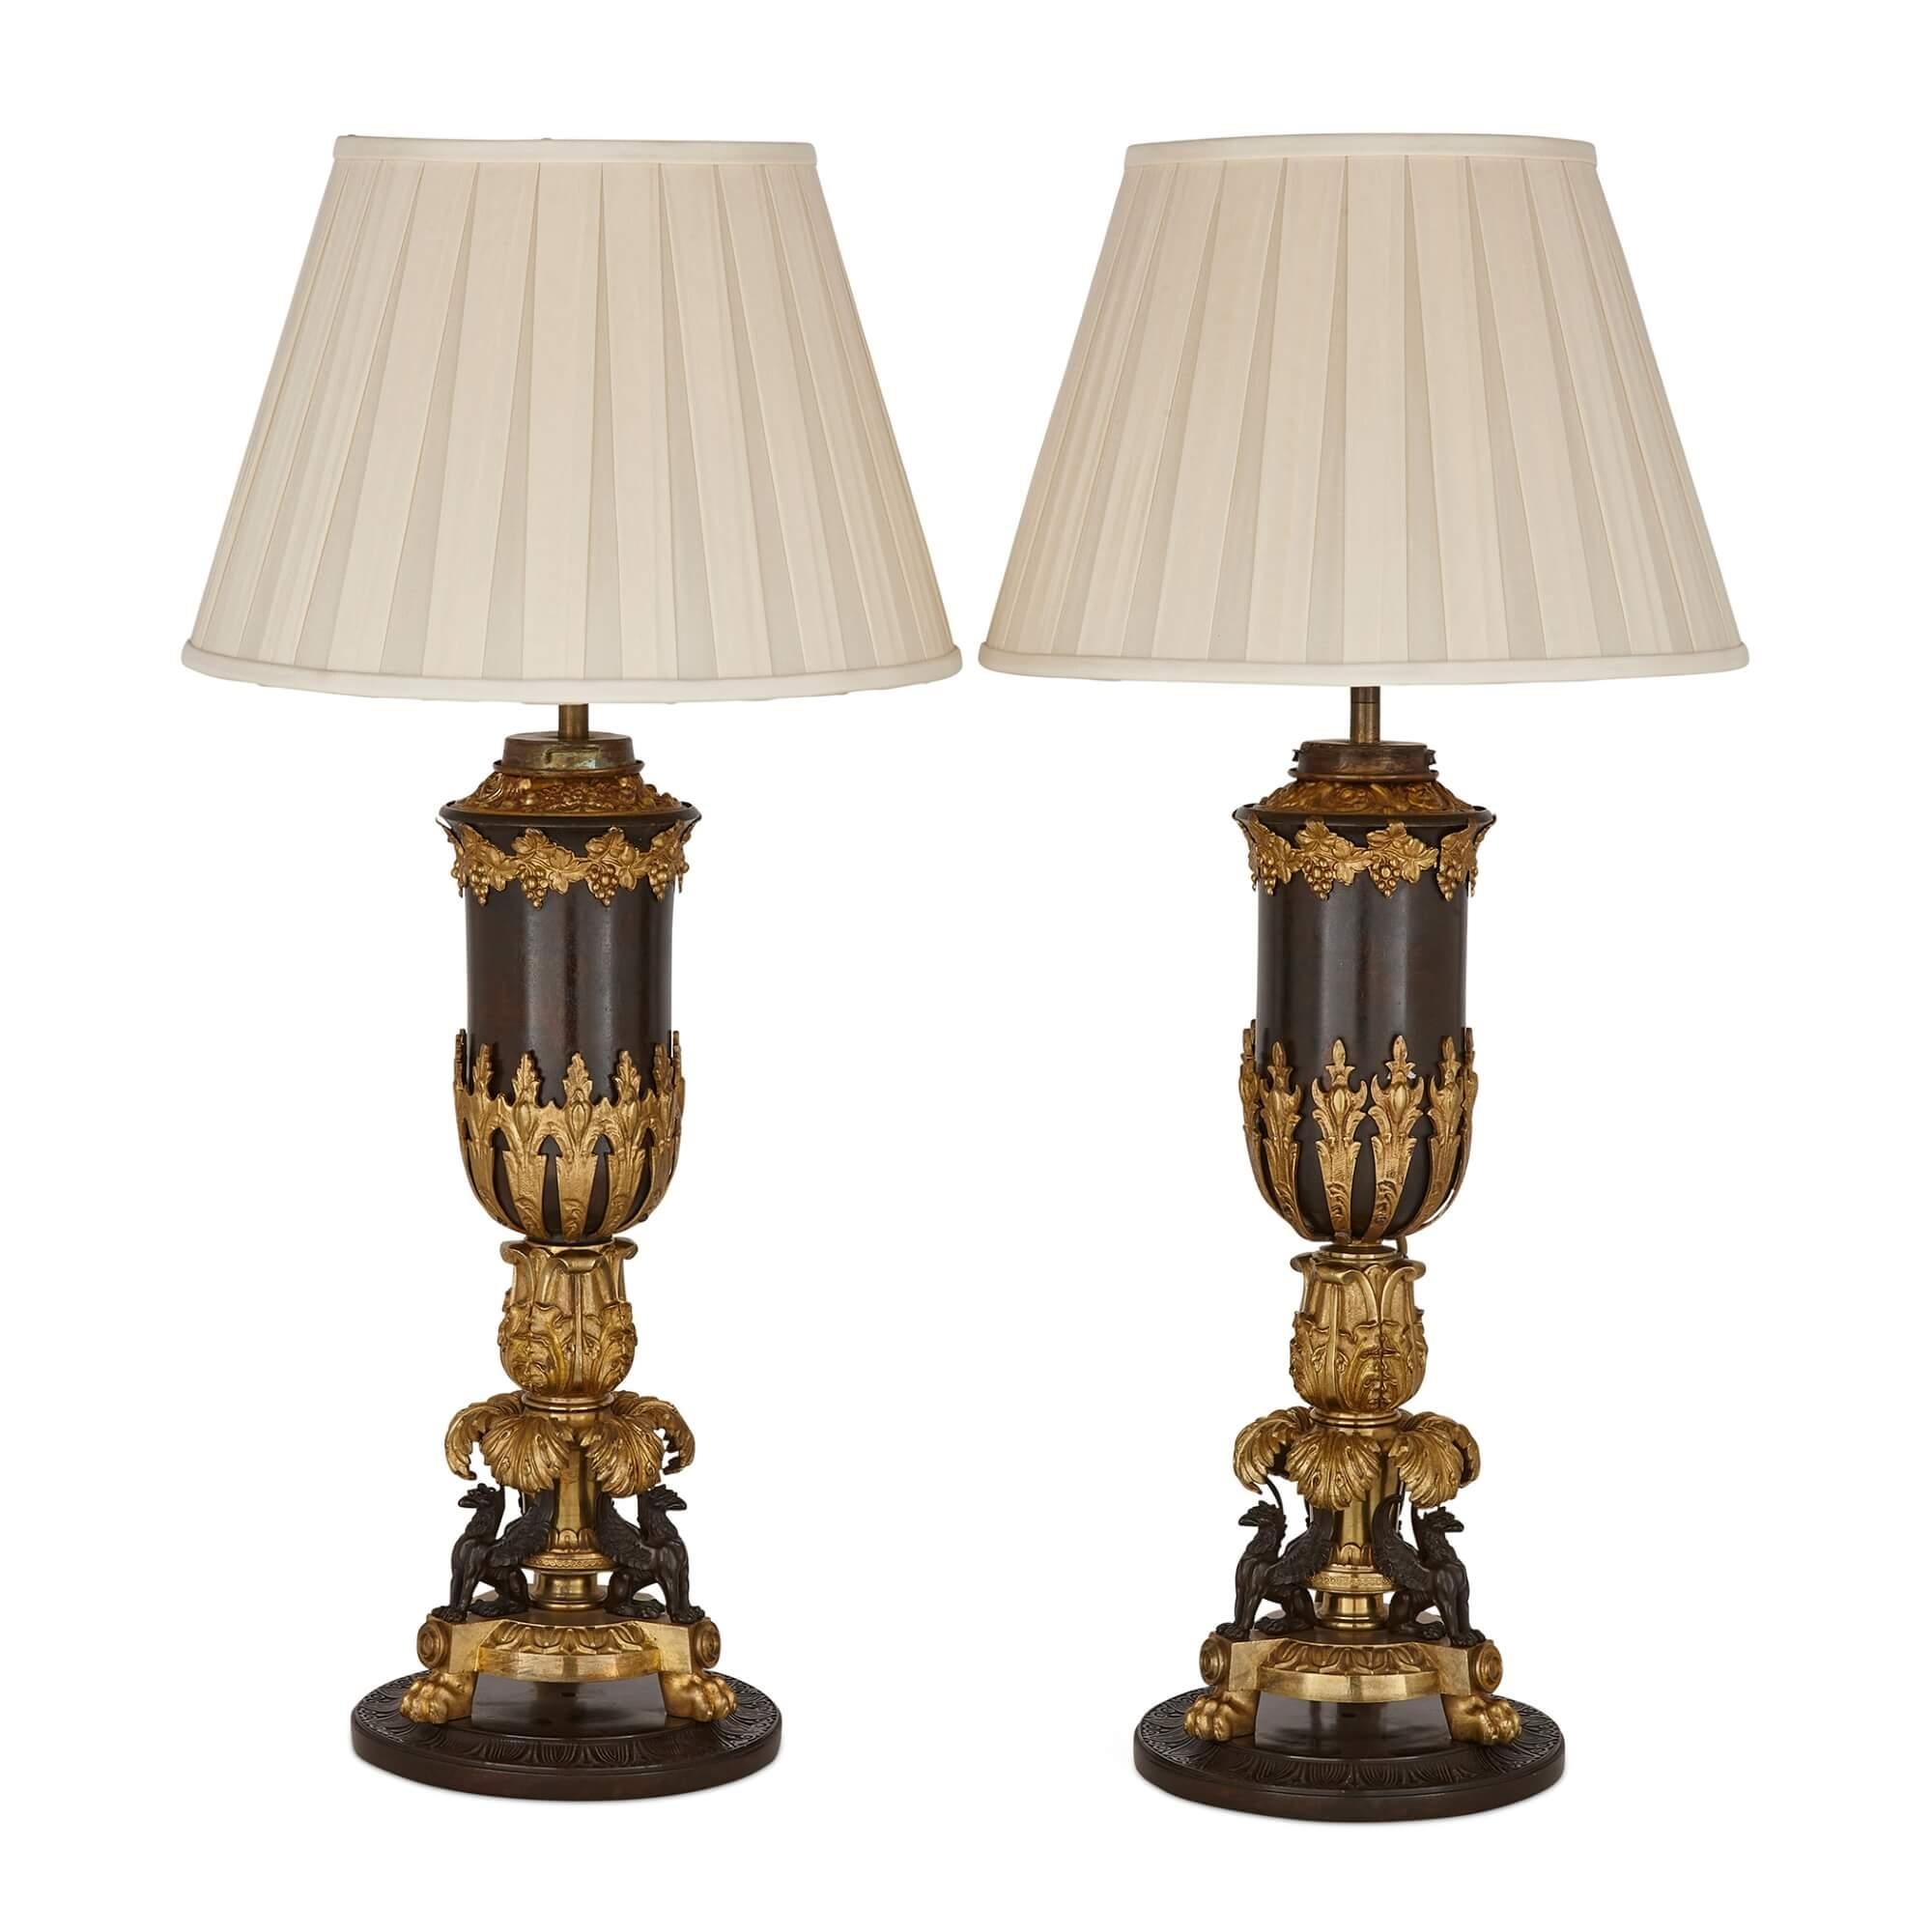 Pair of ormolu and patinated bronze Empire style table lamps
English, Late 19th Century
Lamps: height 56cm, diameter 20cm
Shades: height 24.5cm, diameter 35cm

Crafted during the late 19th century, these fine and delicate antique table lamps are